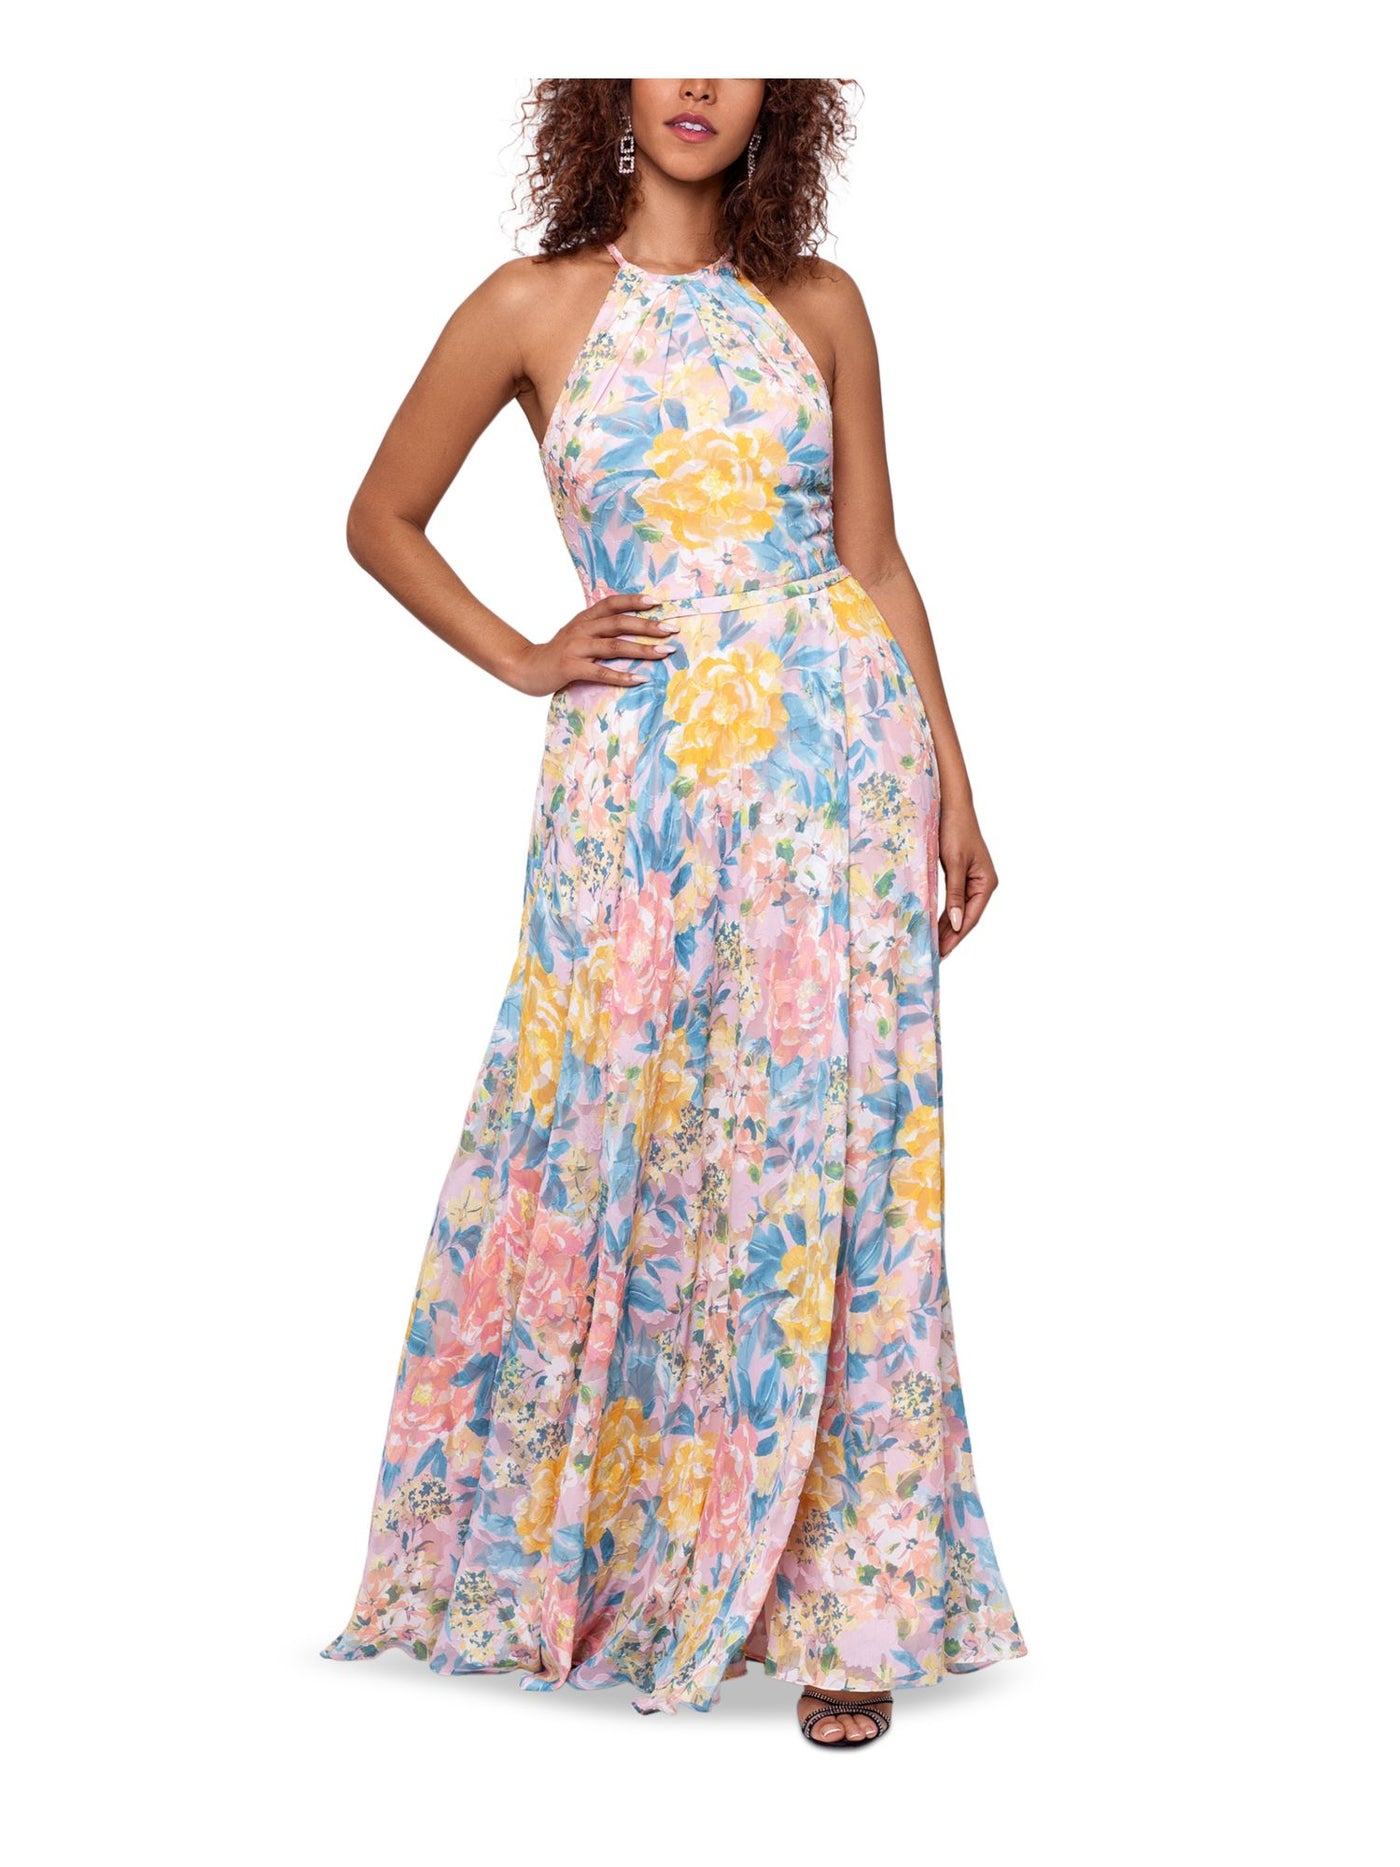 BETSY & ADAM Womens Pink Zippered Pocketed Wrap-style Skirt Lined Floral Sleeveless Halter Full-Length Formal Gown Dress Petites 12P